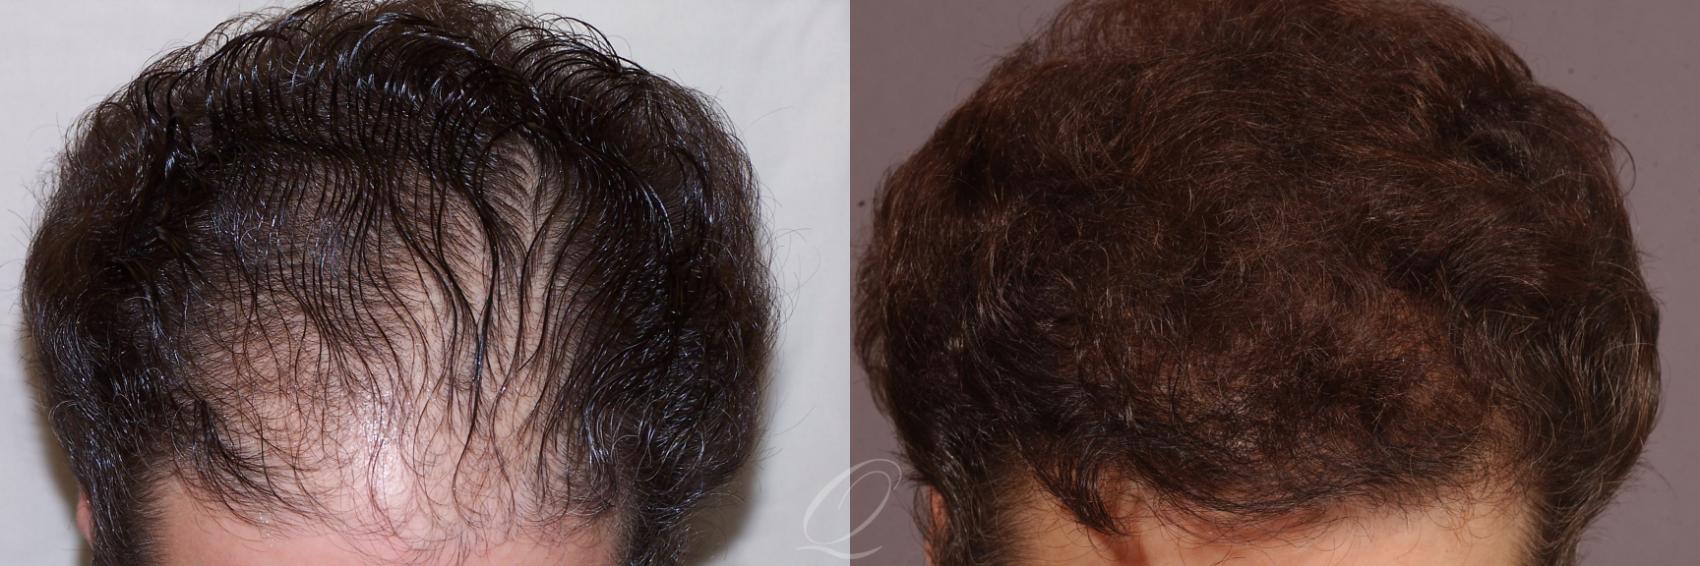 FUT Case 1049 Before & After View #1 | Rochester, NY | Quatela Center for Hair Restoration